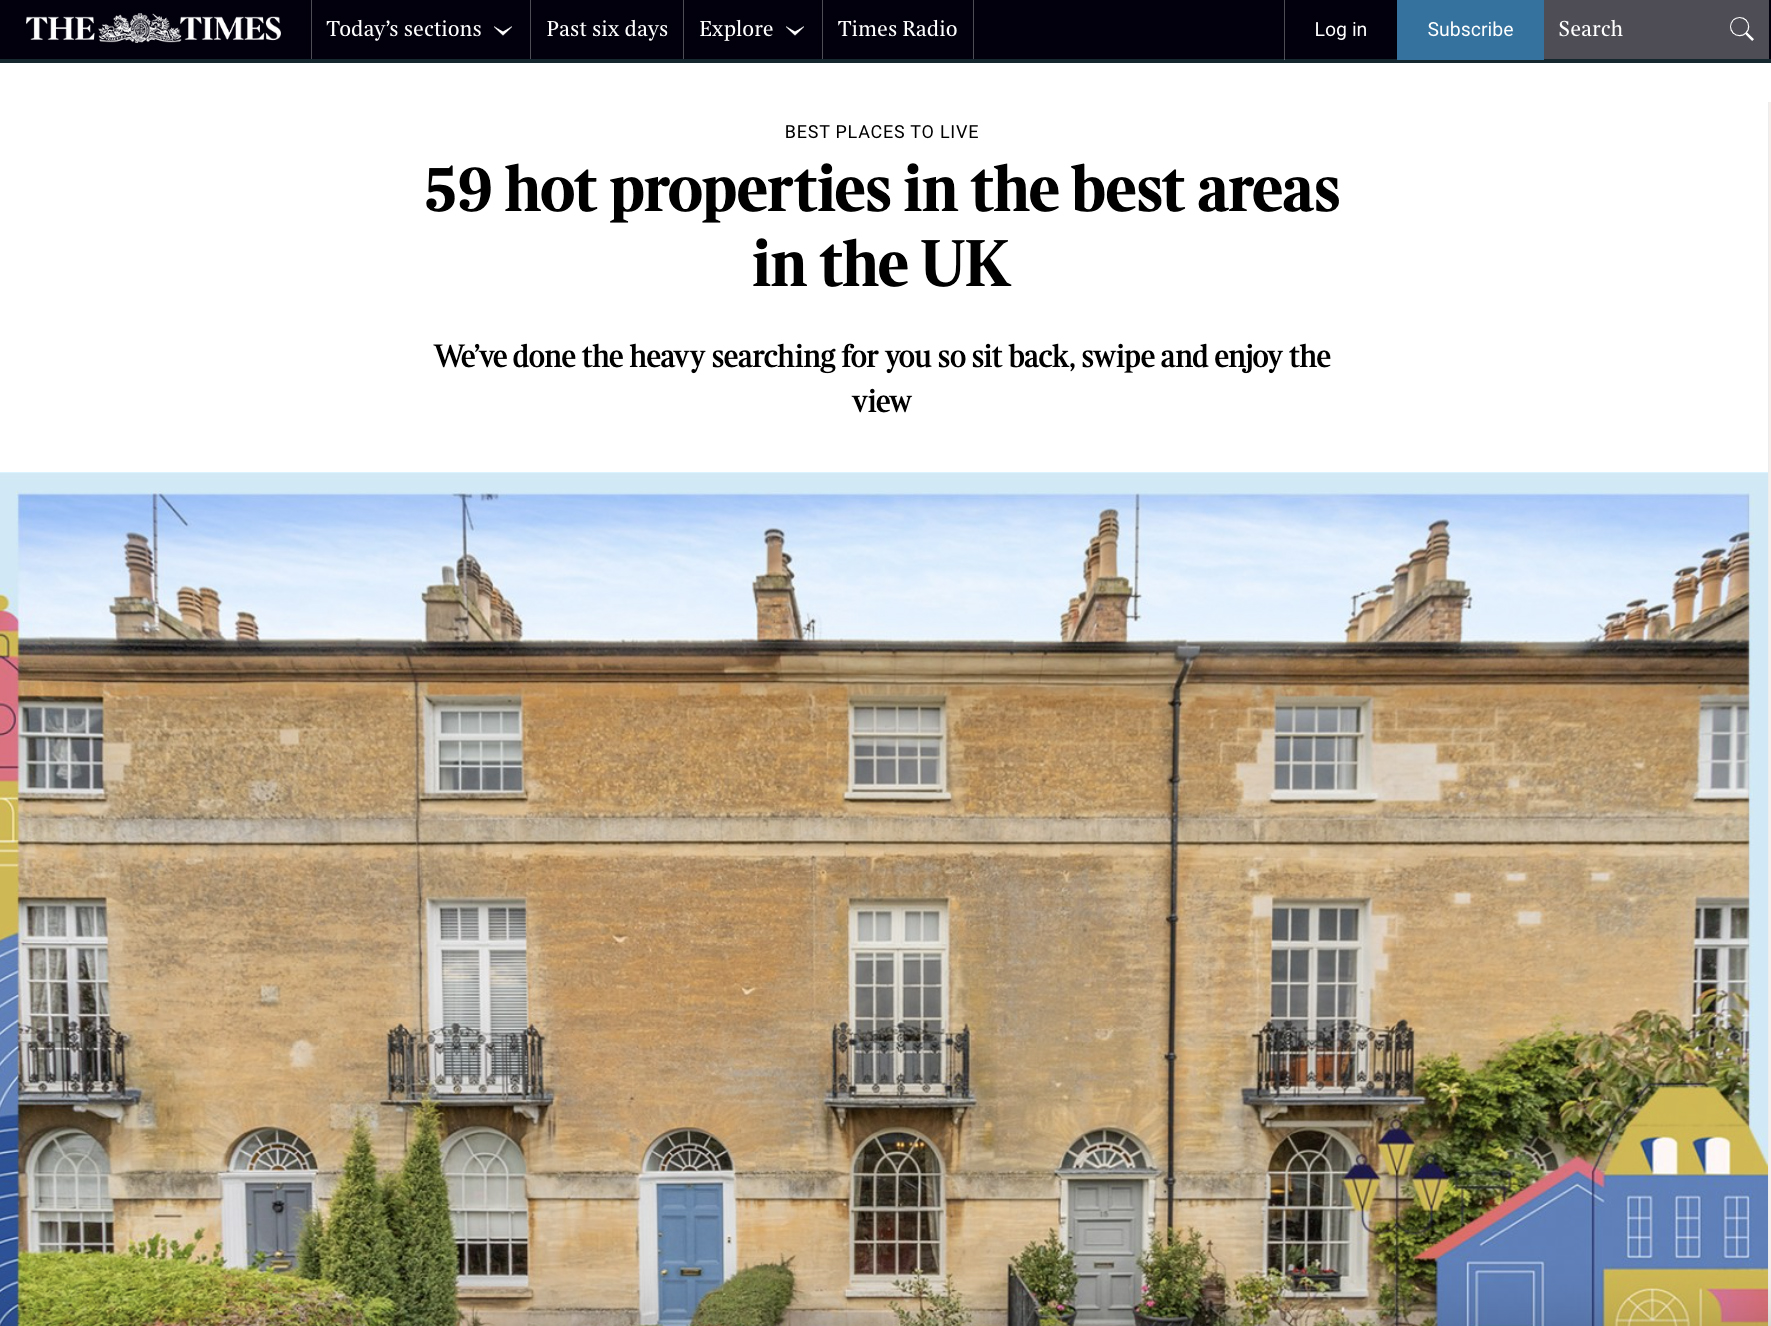 59 hot properties in the best areas in the UK.